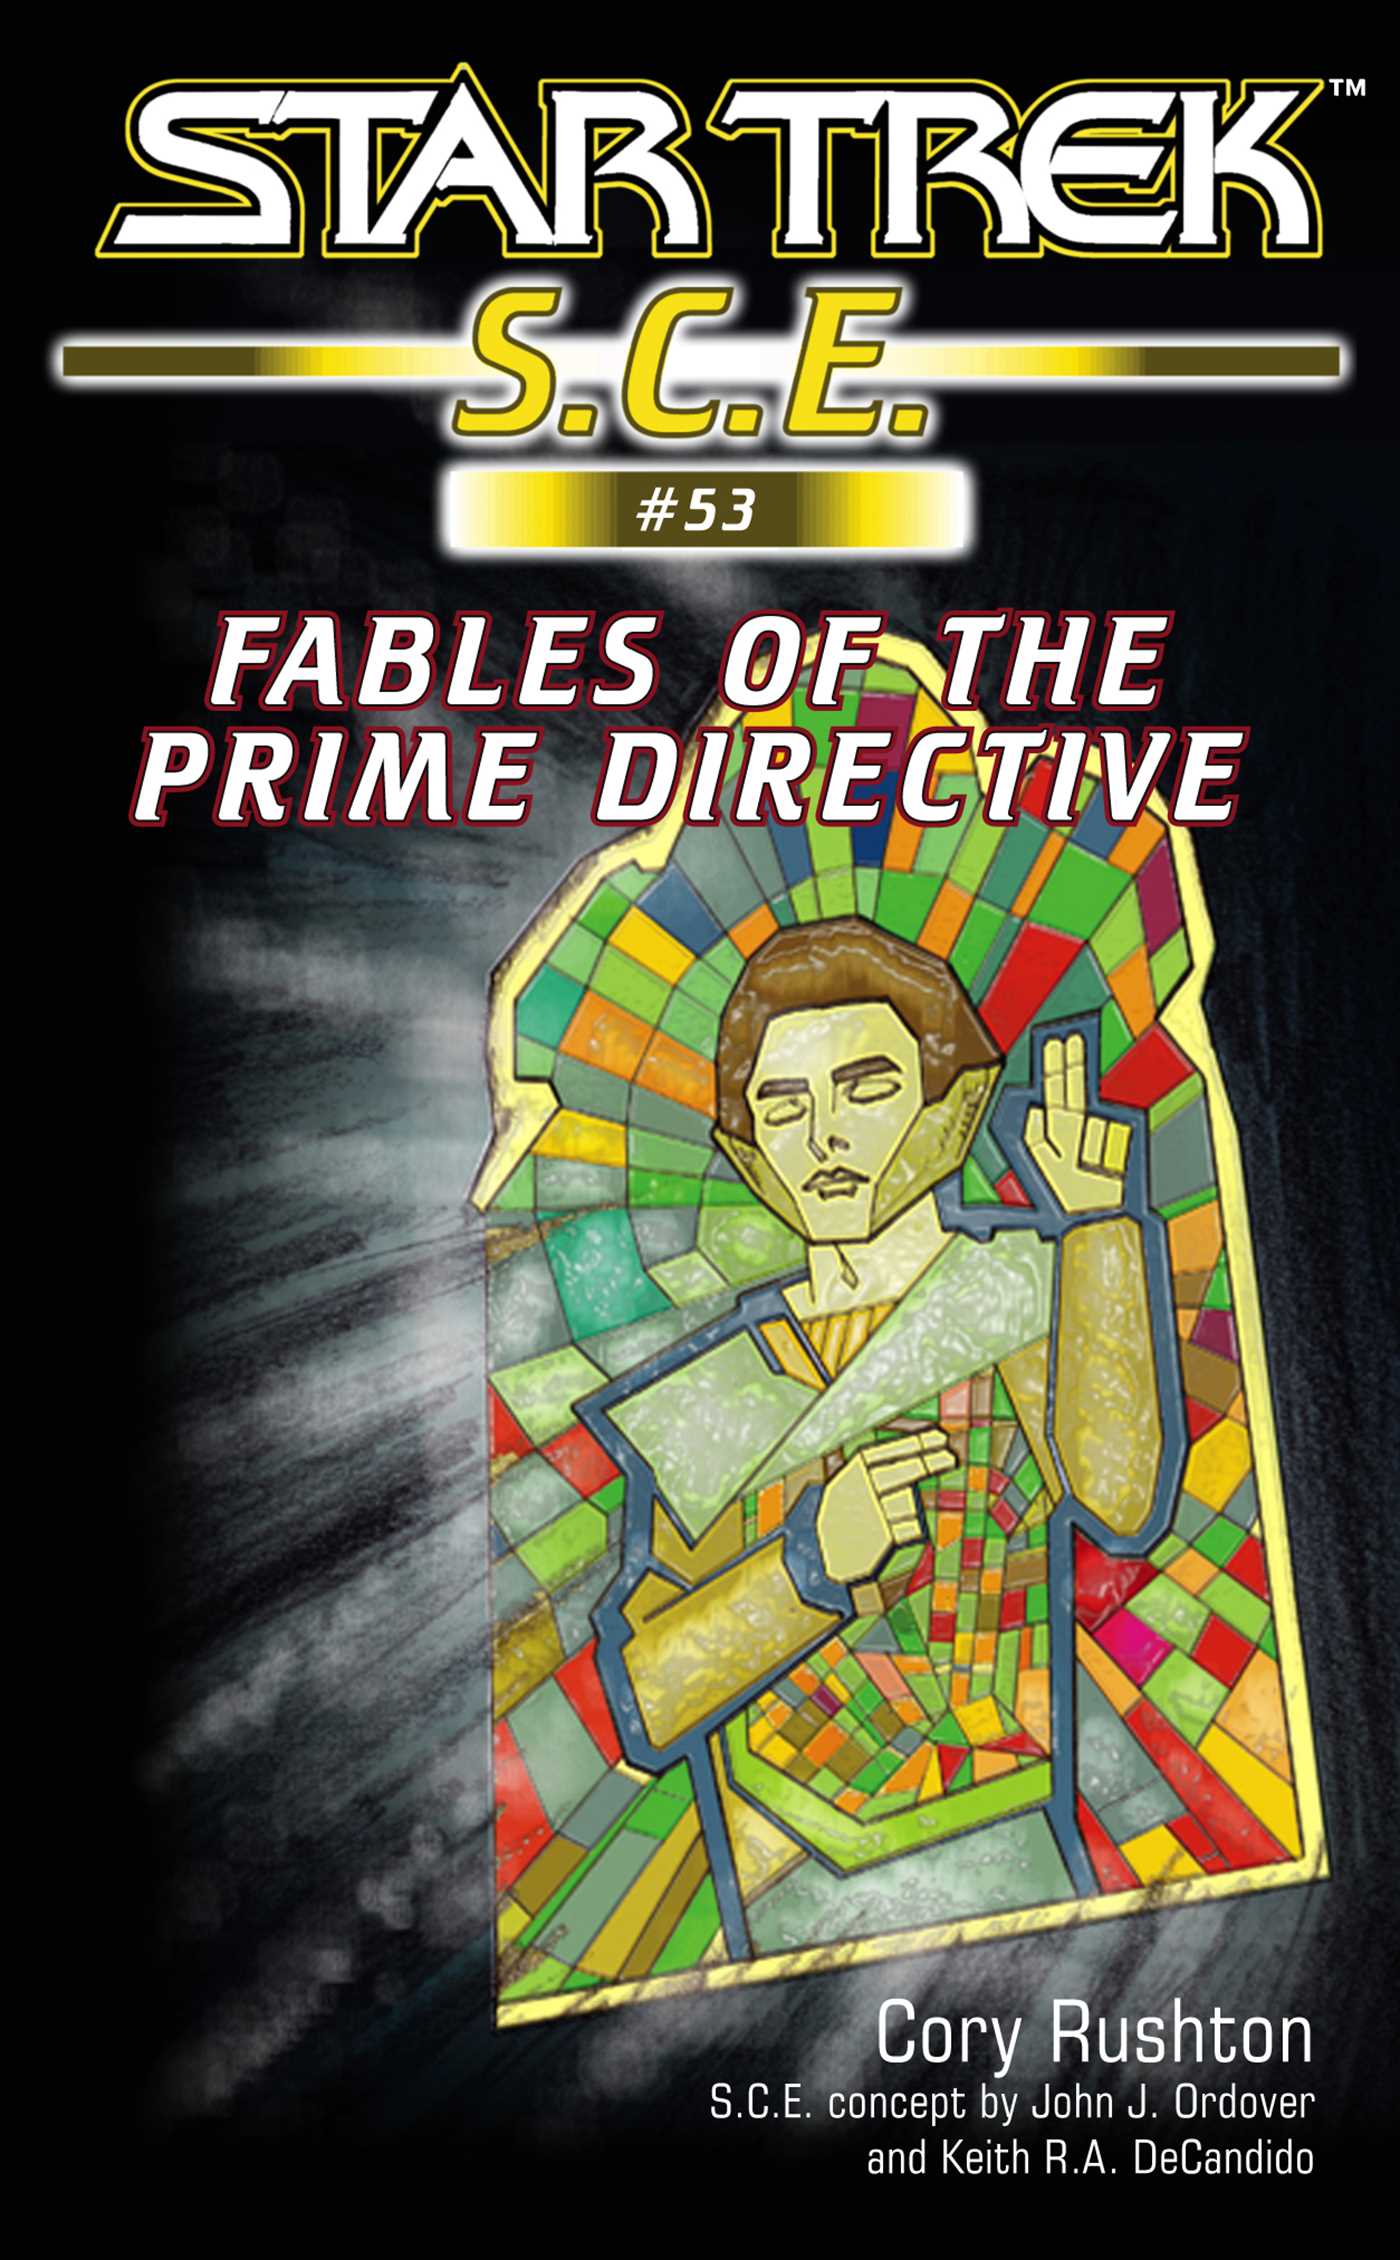 Star Trek: Fables of the Prime Directive